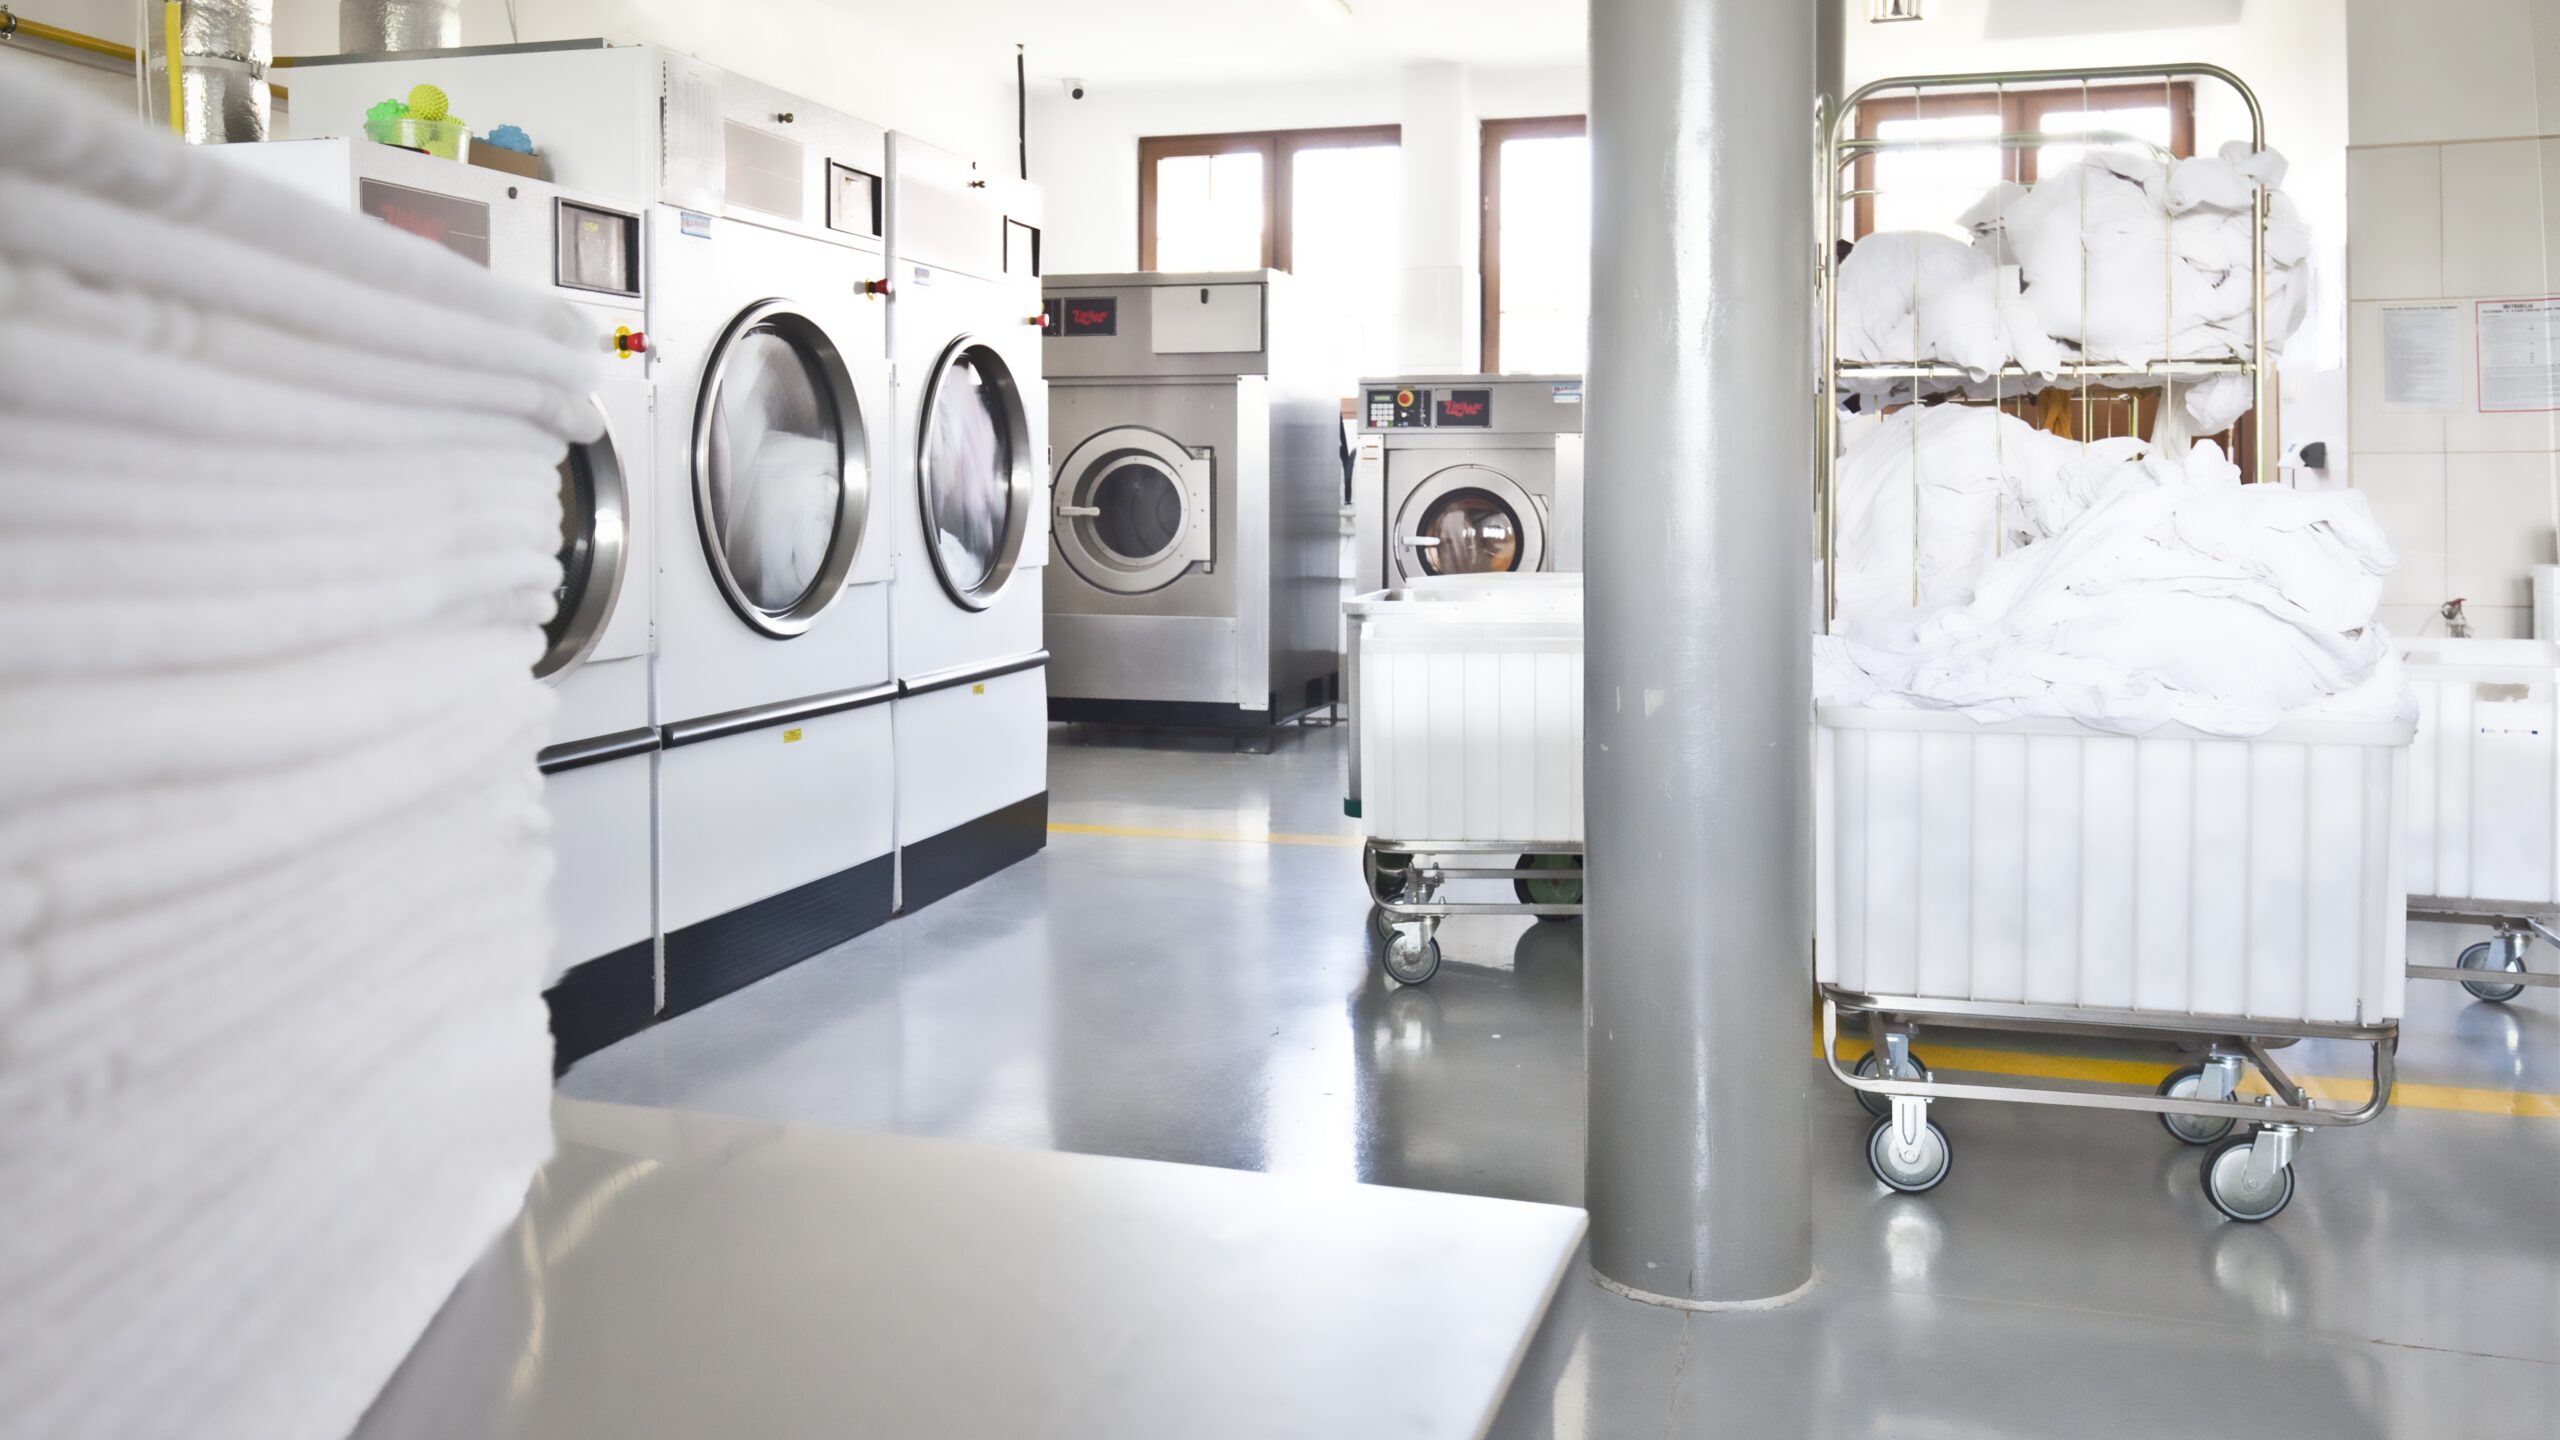 The key considerations of hotel laundry rooms